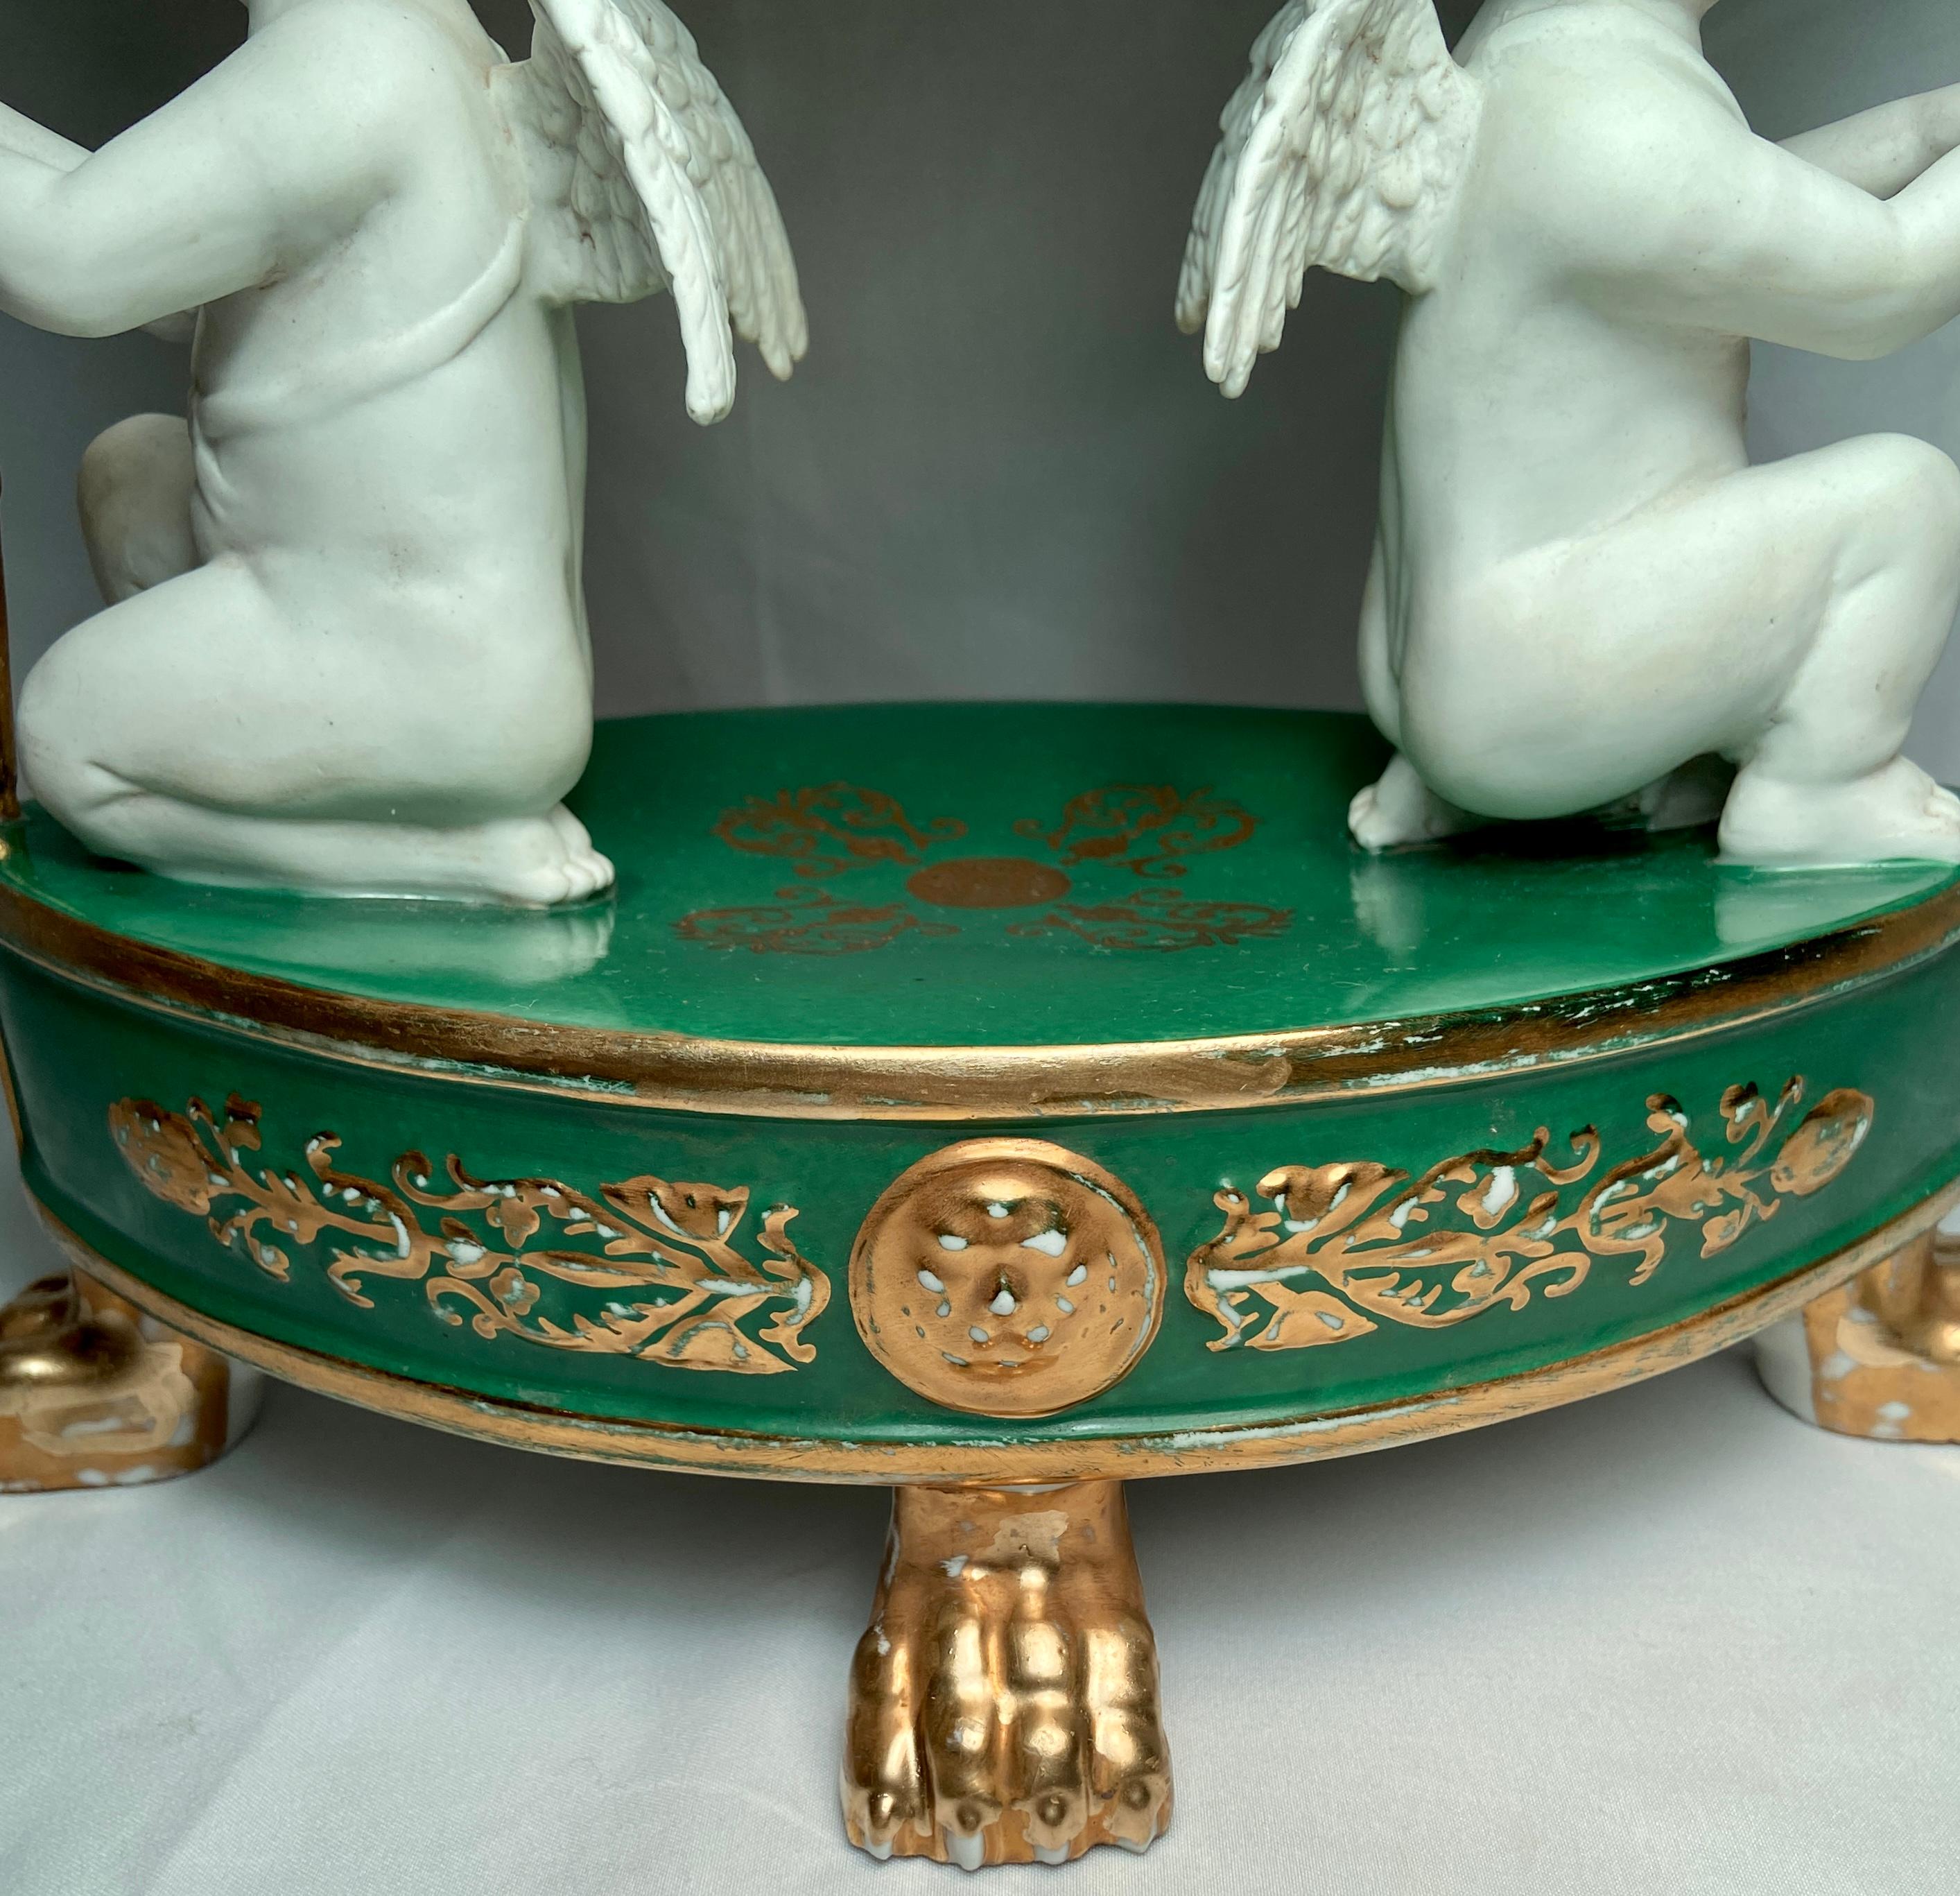 Pair Antique French Sevres Green, White & Gold Porcelain Urns, circa 1880 For Sale 6